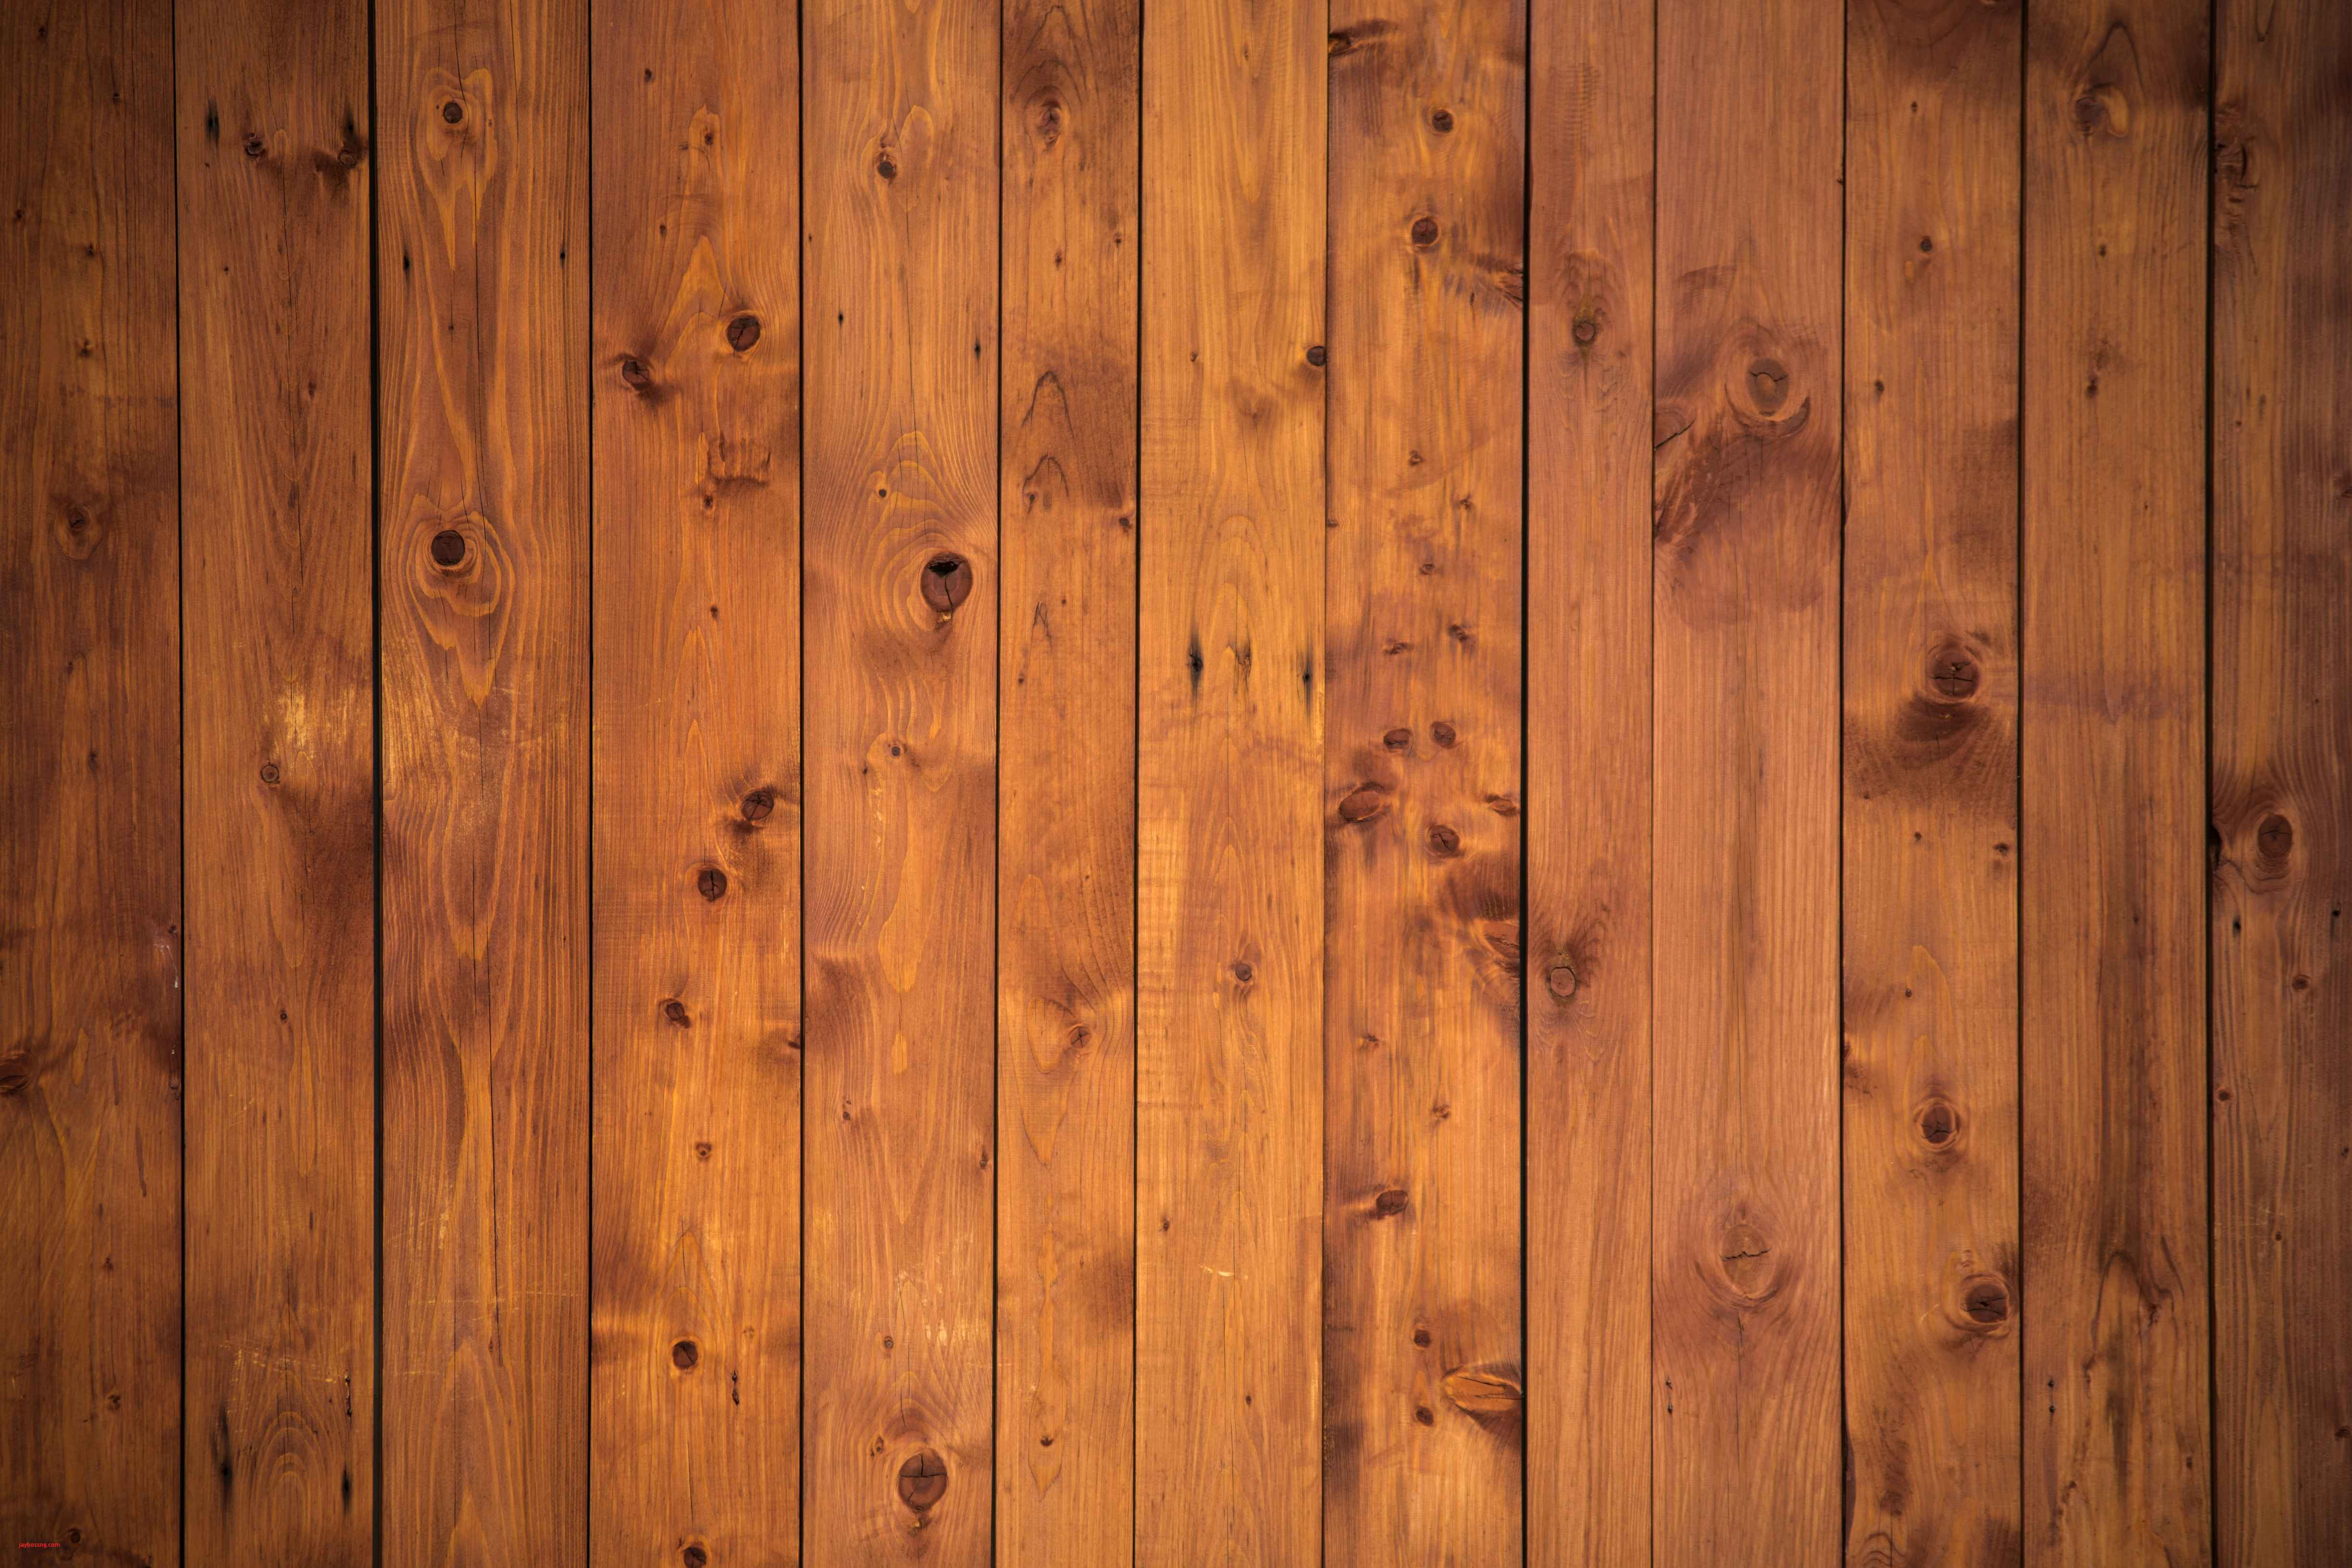 24 Awesome Pictures Of Dark Hardwood Floors In Homes 2024 free download pictures of dark hardwood floors in homes of dark wood desk unique free nature board antique retro texture plank pertaining to dark wood desk unique free nature board antique retro texture p